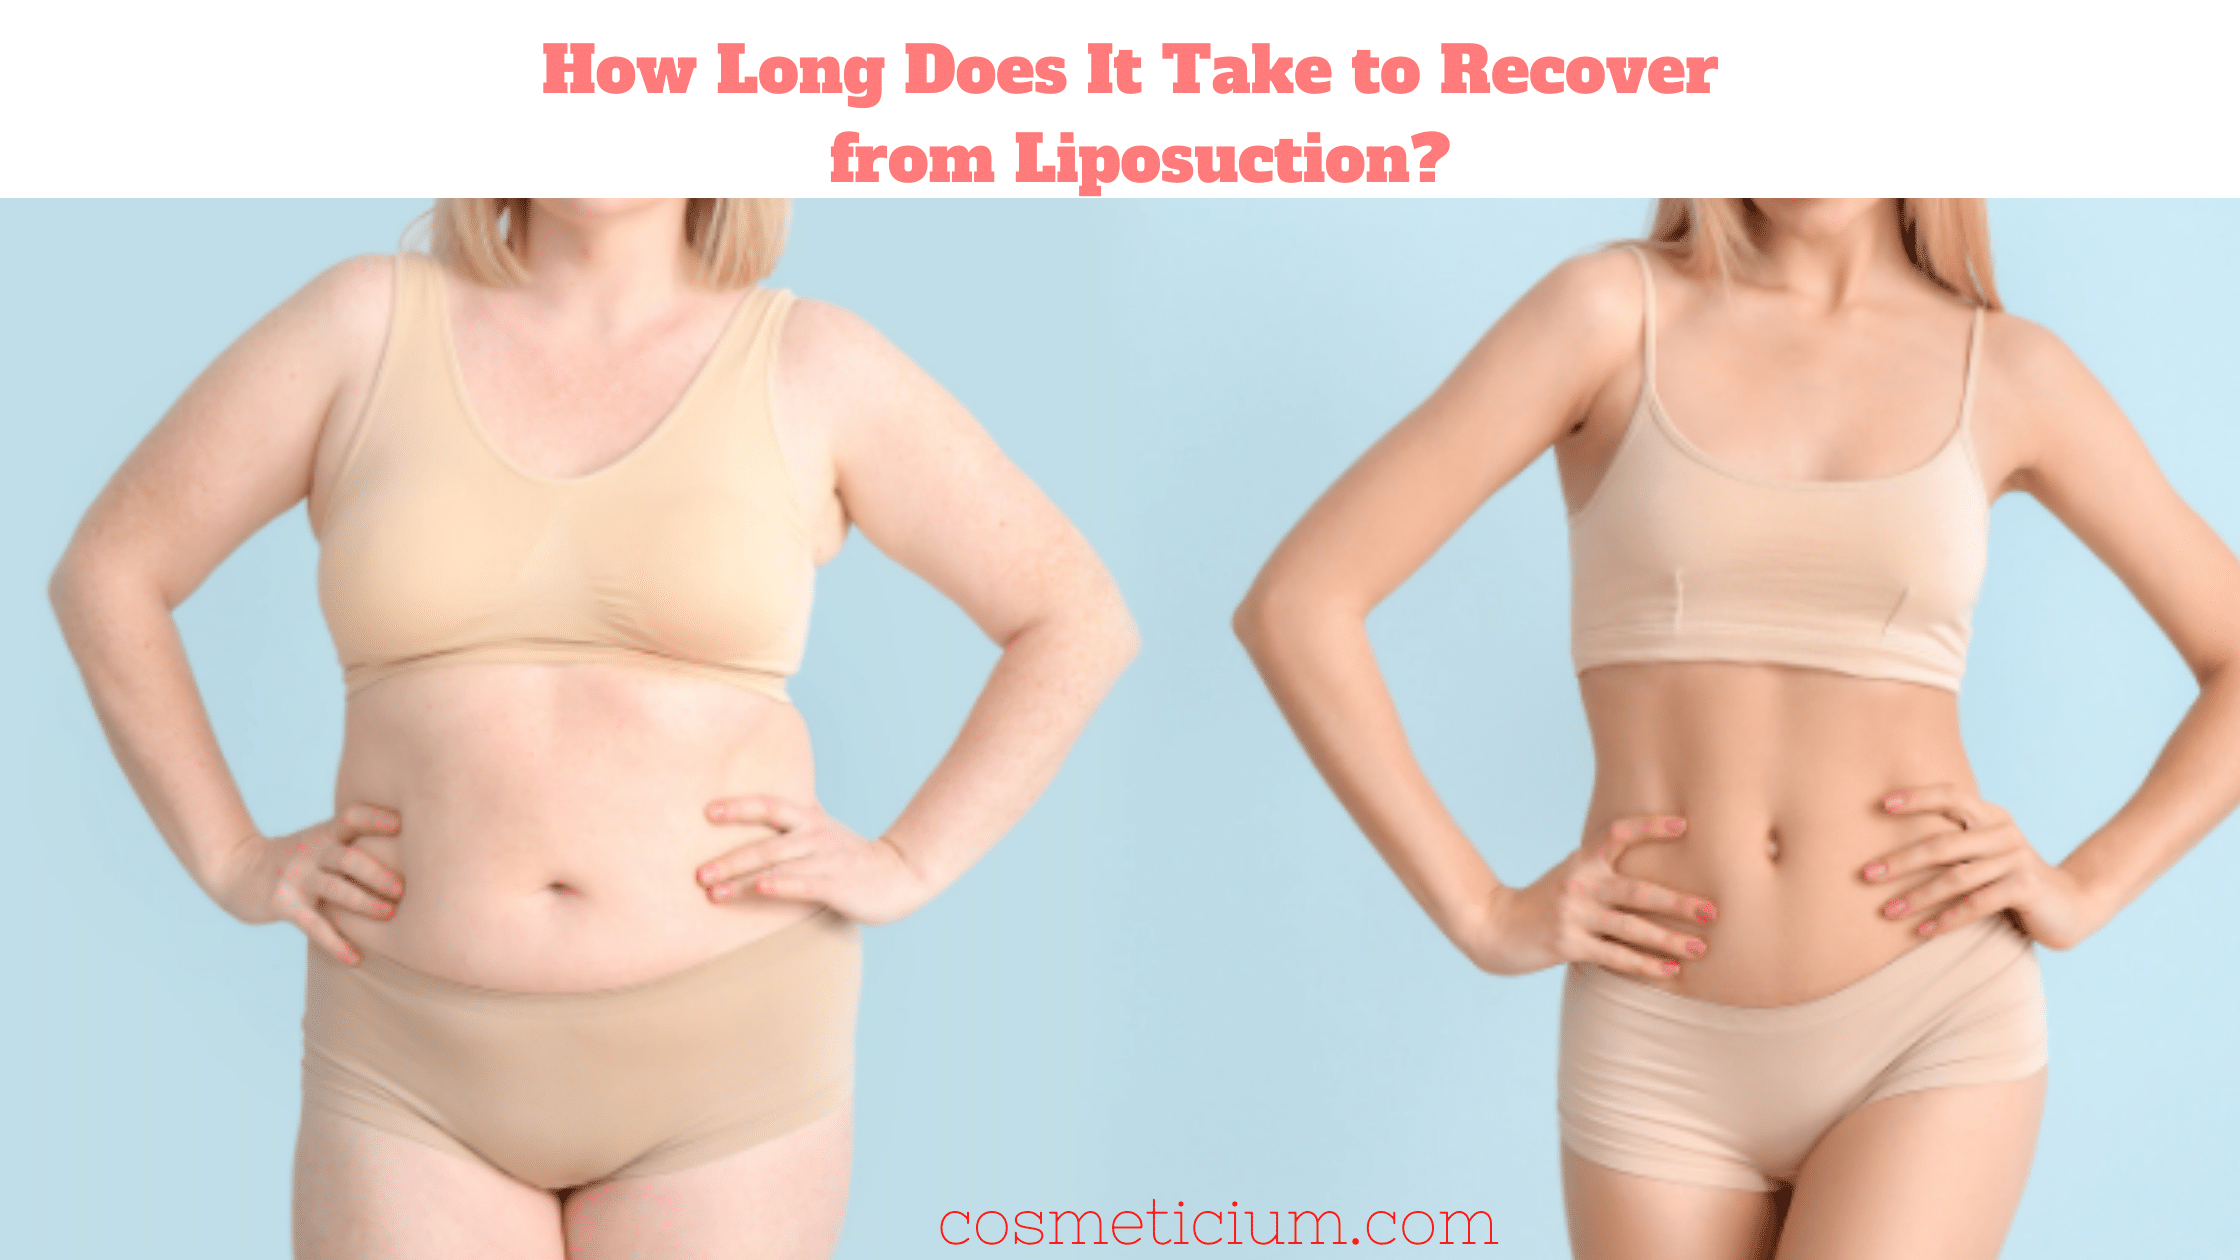 How Long Does It Take to Recover from Liposuction?